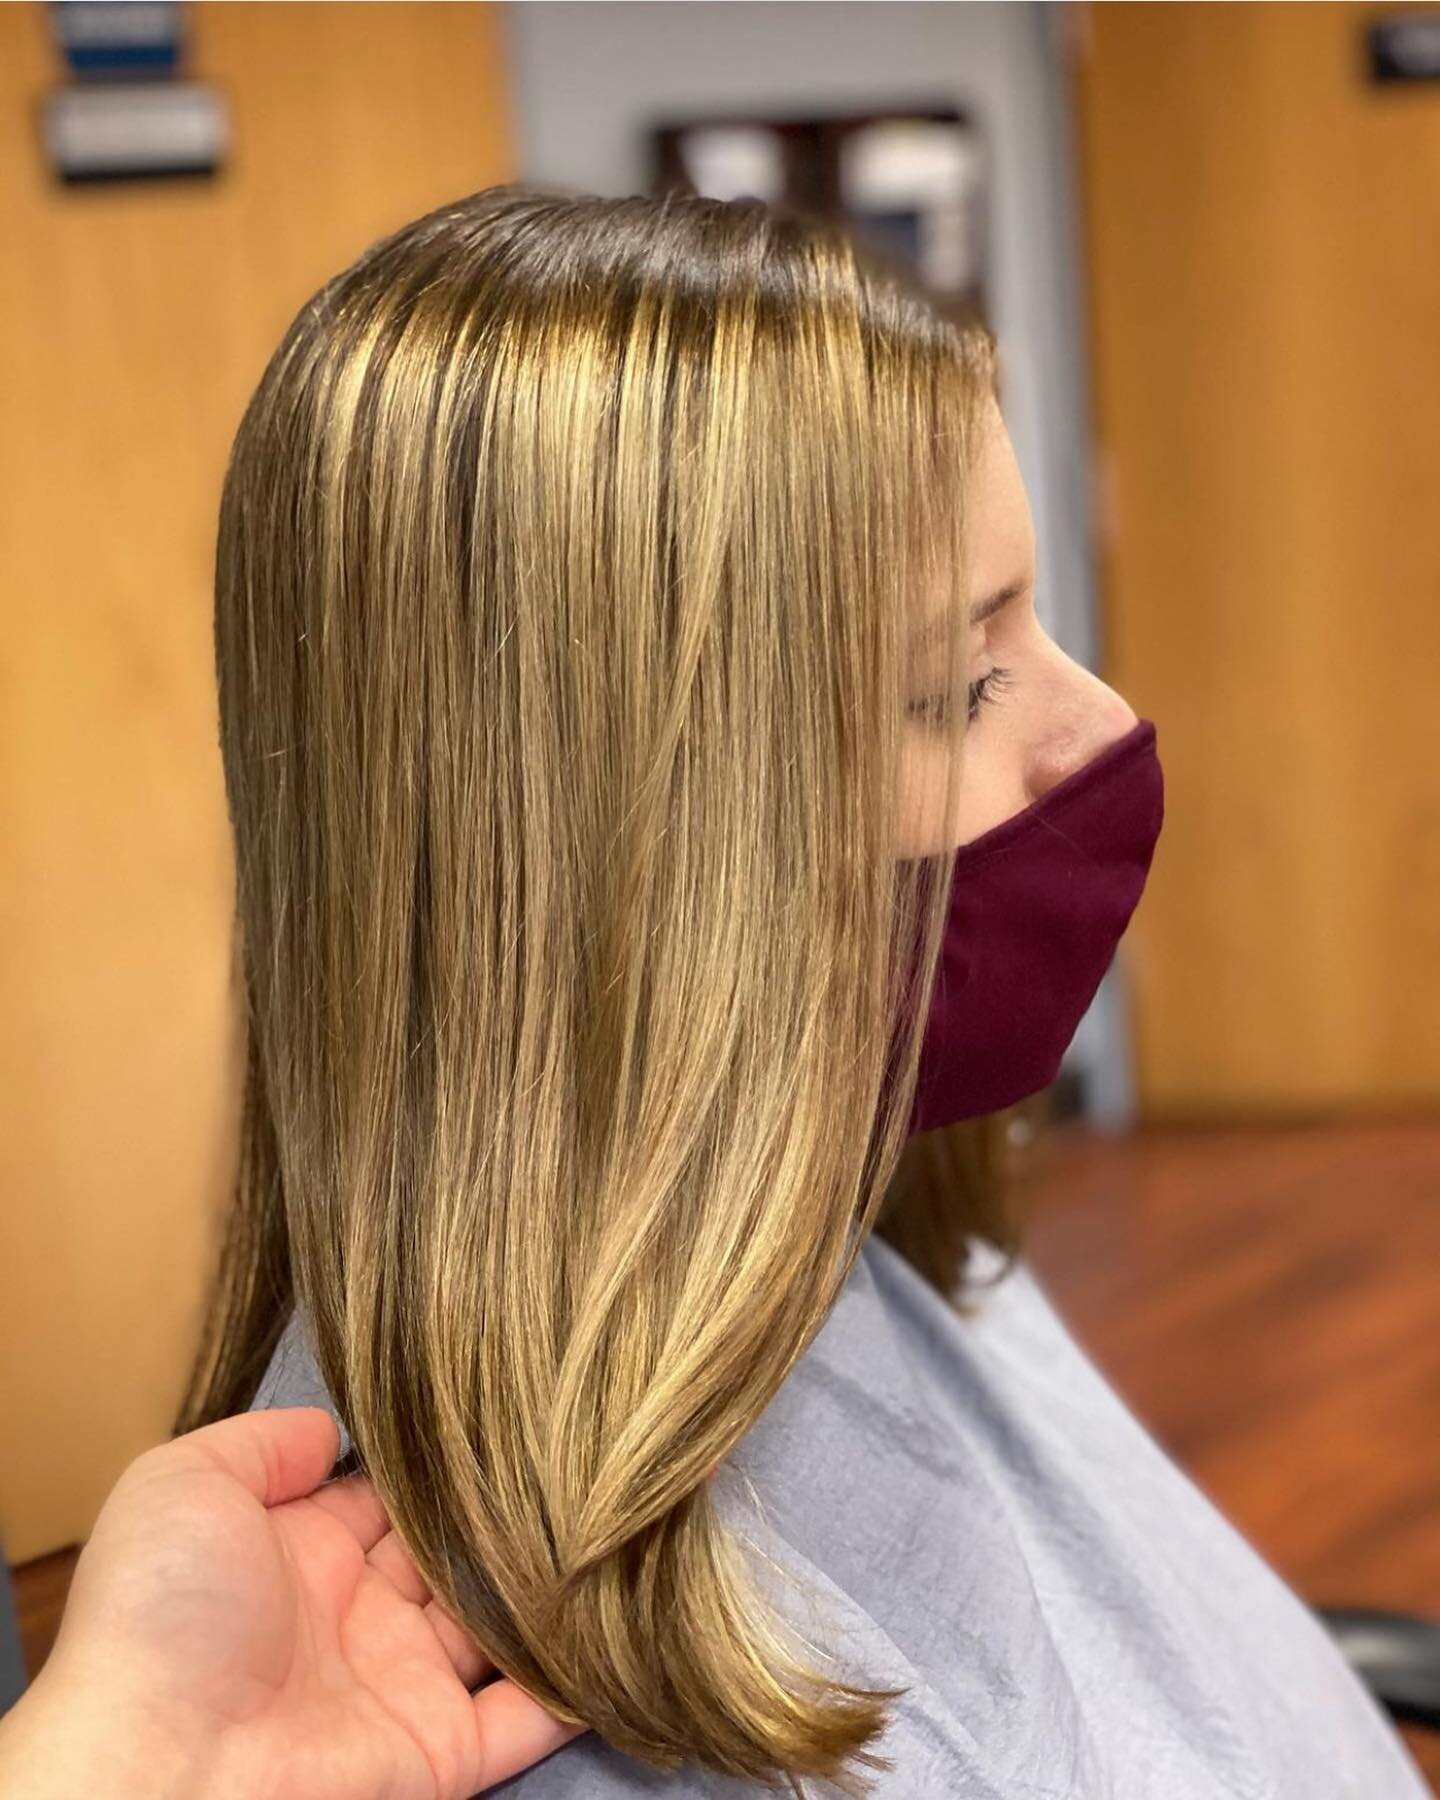 Who doesn&rsquo;t love a nice trim &amp; balayage moment ! 😍
&bull;
&bull;
&bull;
By: @hair_by_gabi.norton 

#mclean #virginiahair #mcleanhairstylist
#virginiahairsylist #mcleanhairsalon #tysonscornerhairstylist 
#tysonscornerhair #McLeanhair #703ha